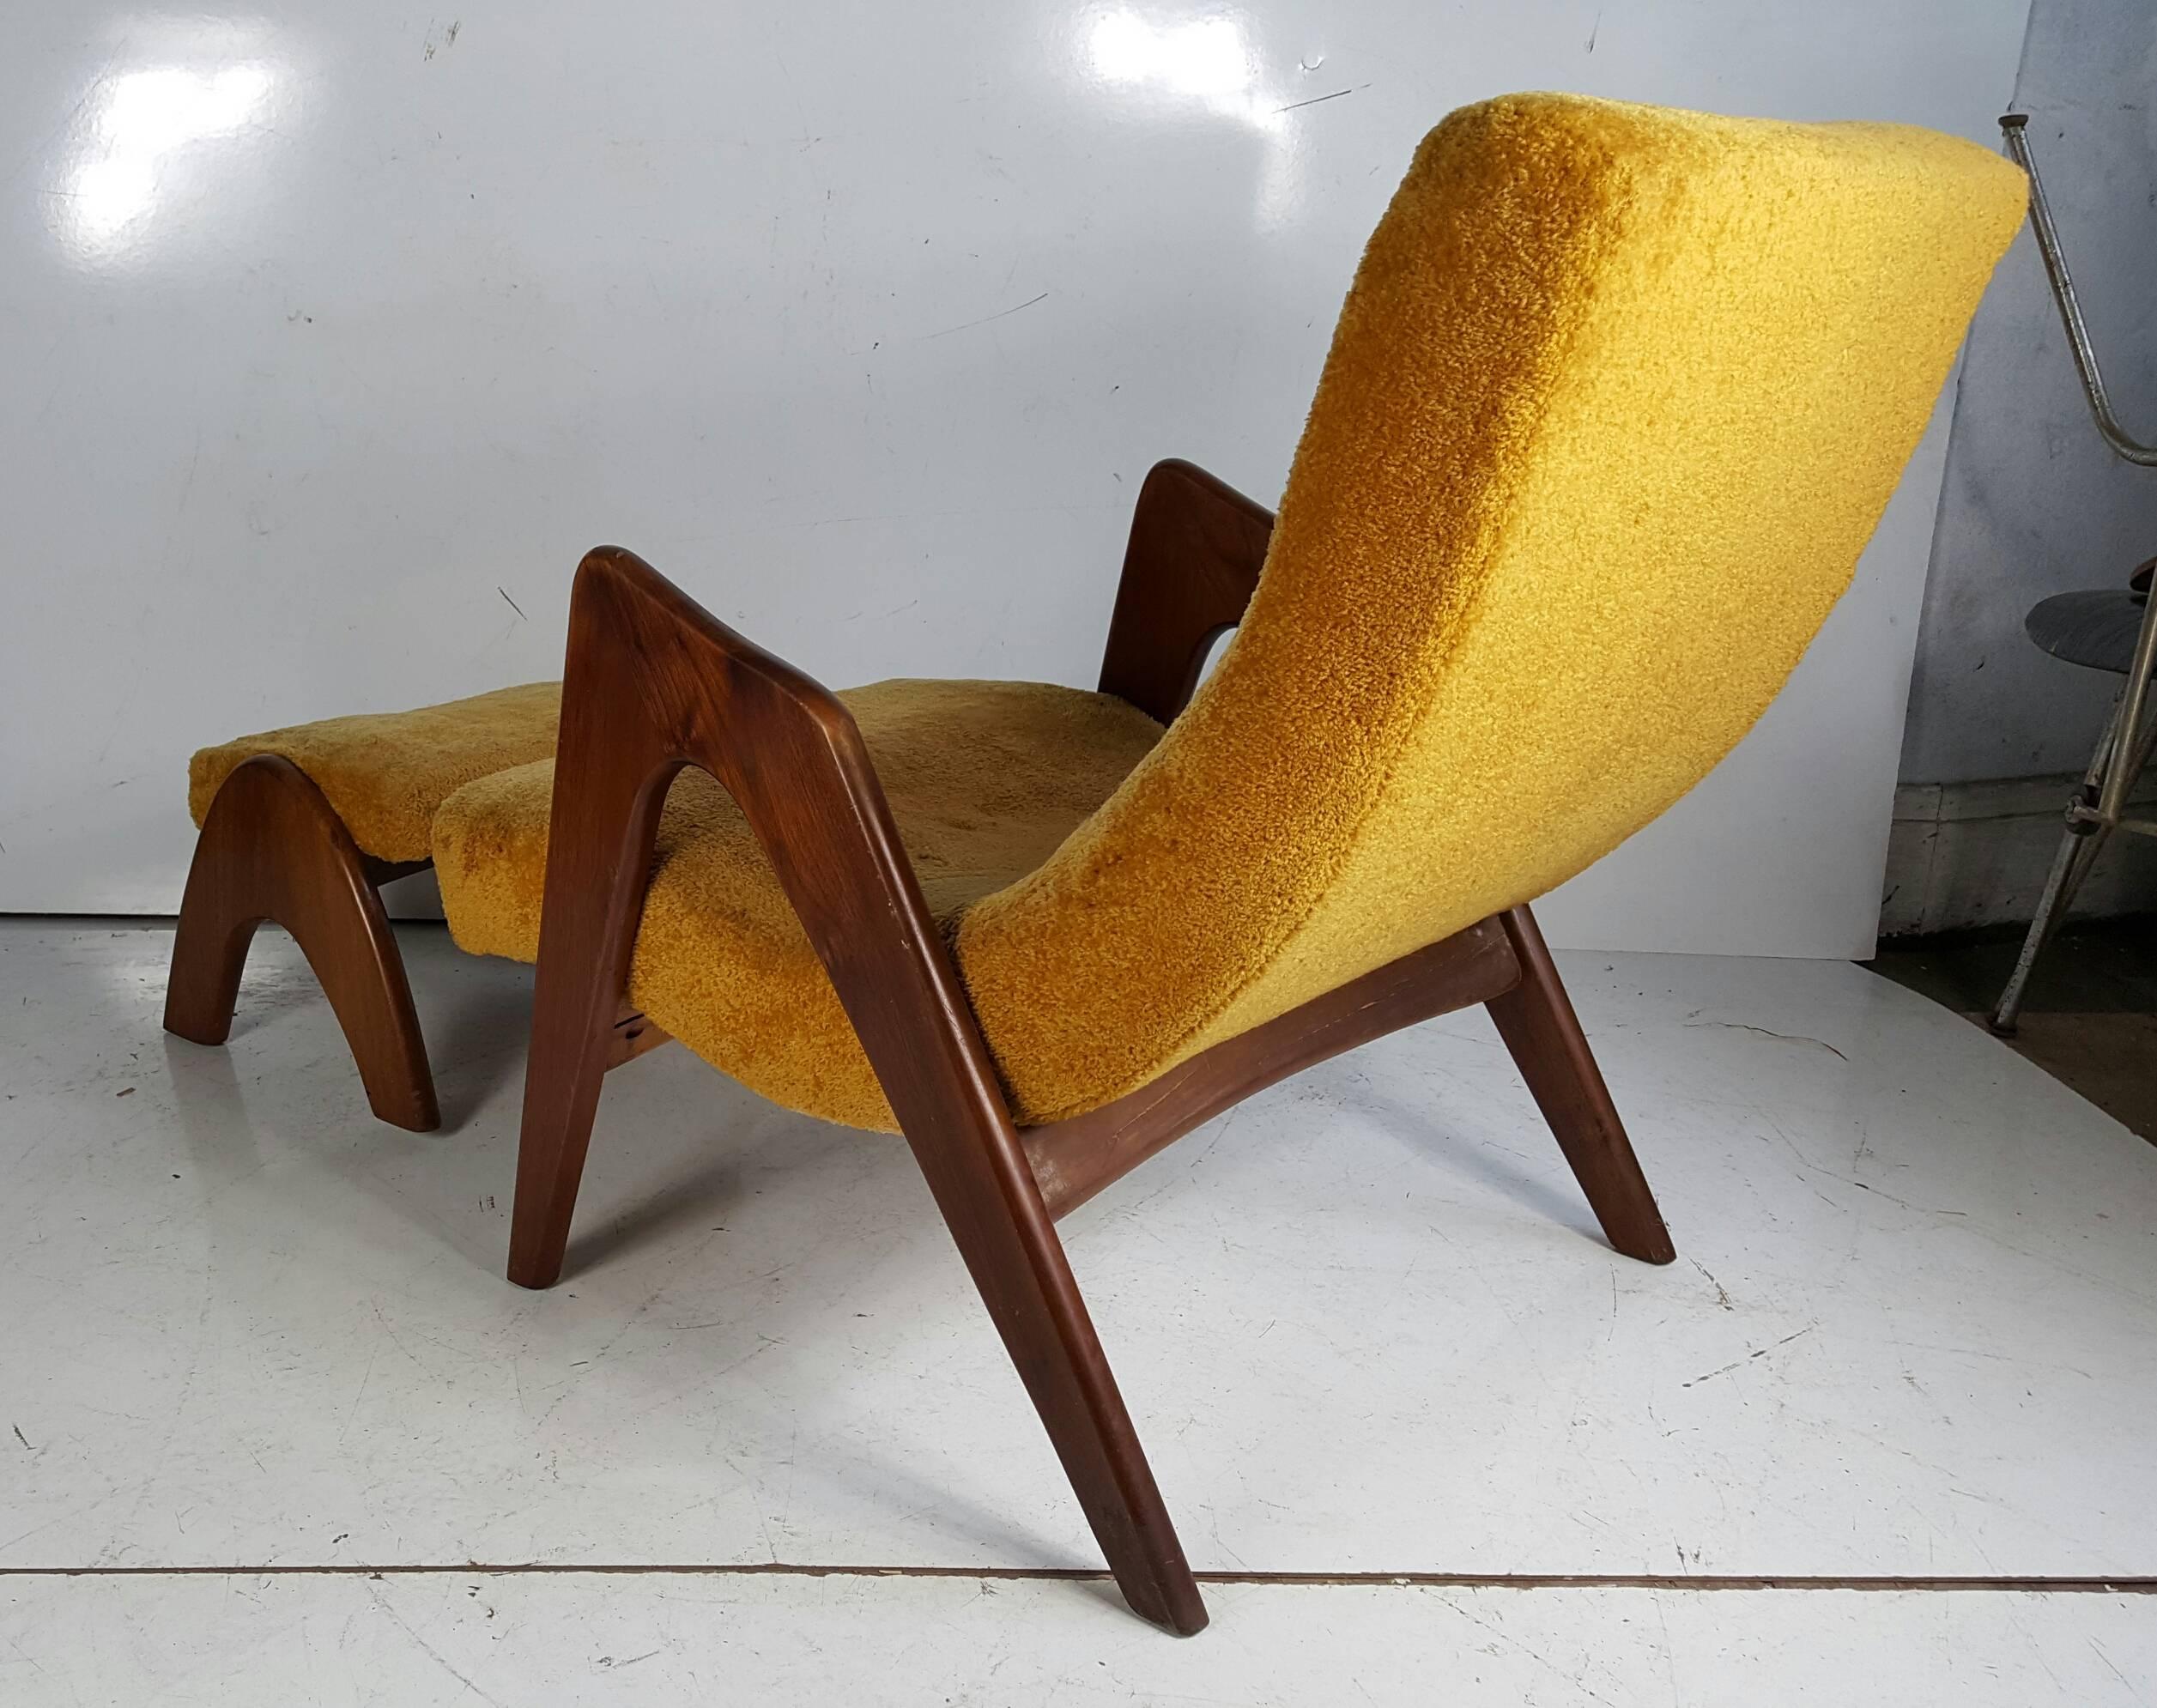 Classic Mid Century Modern Lounge Chair and Ottoman designed by Adrian Pearsall for Craft Associates,,Boomerang arm ottoman design.. 